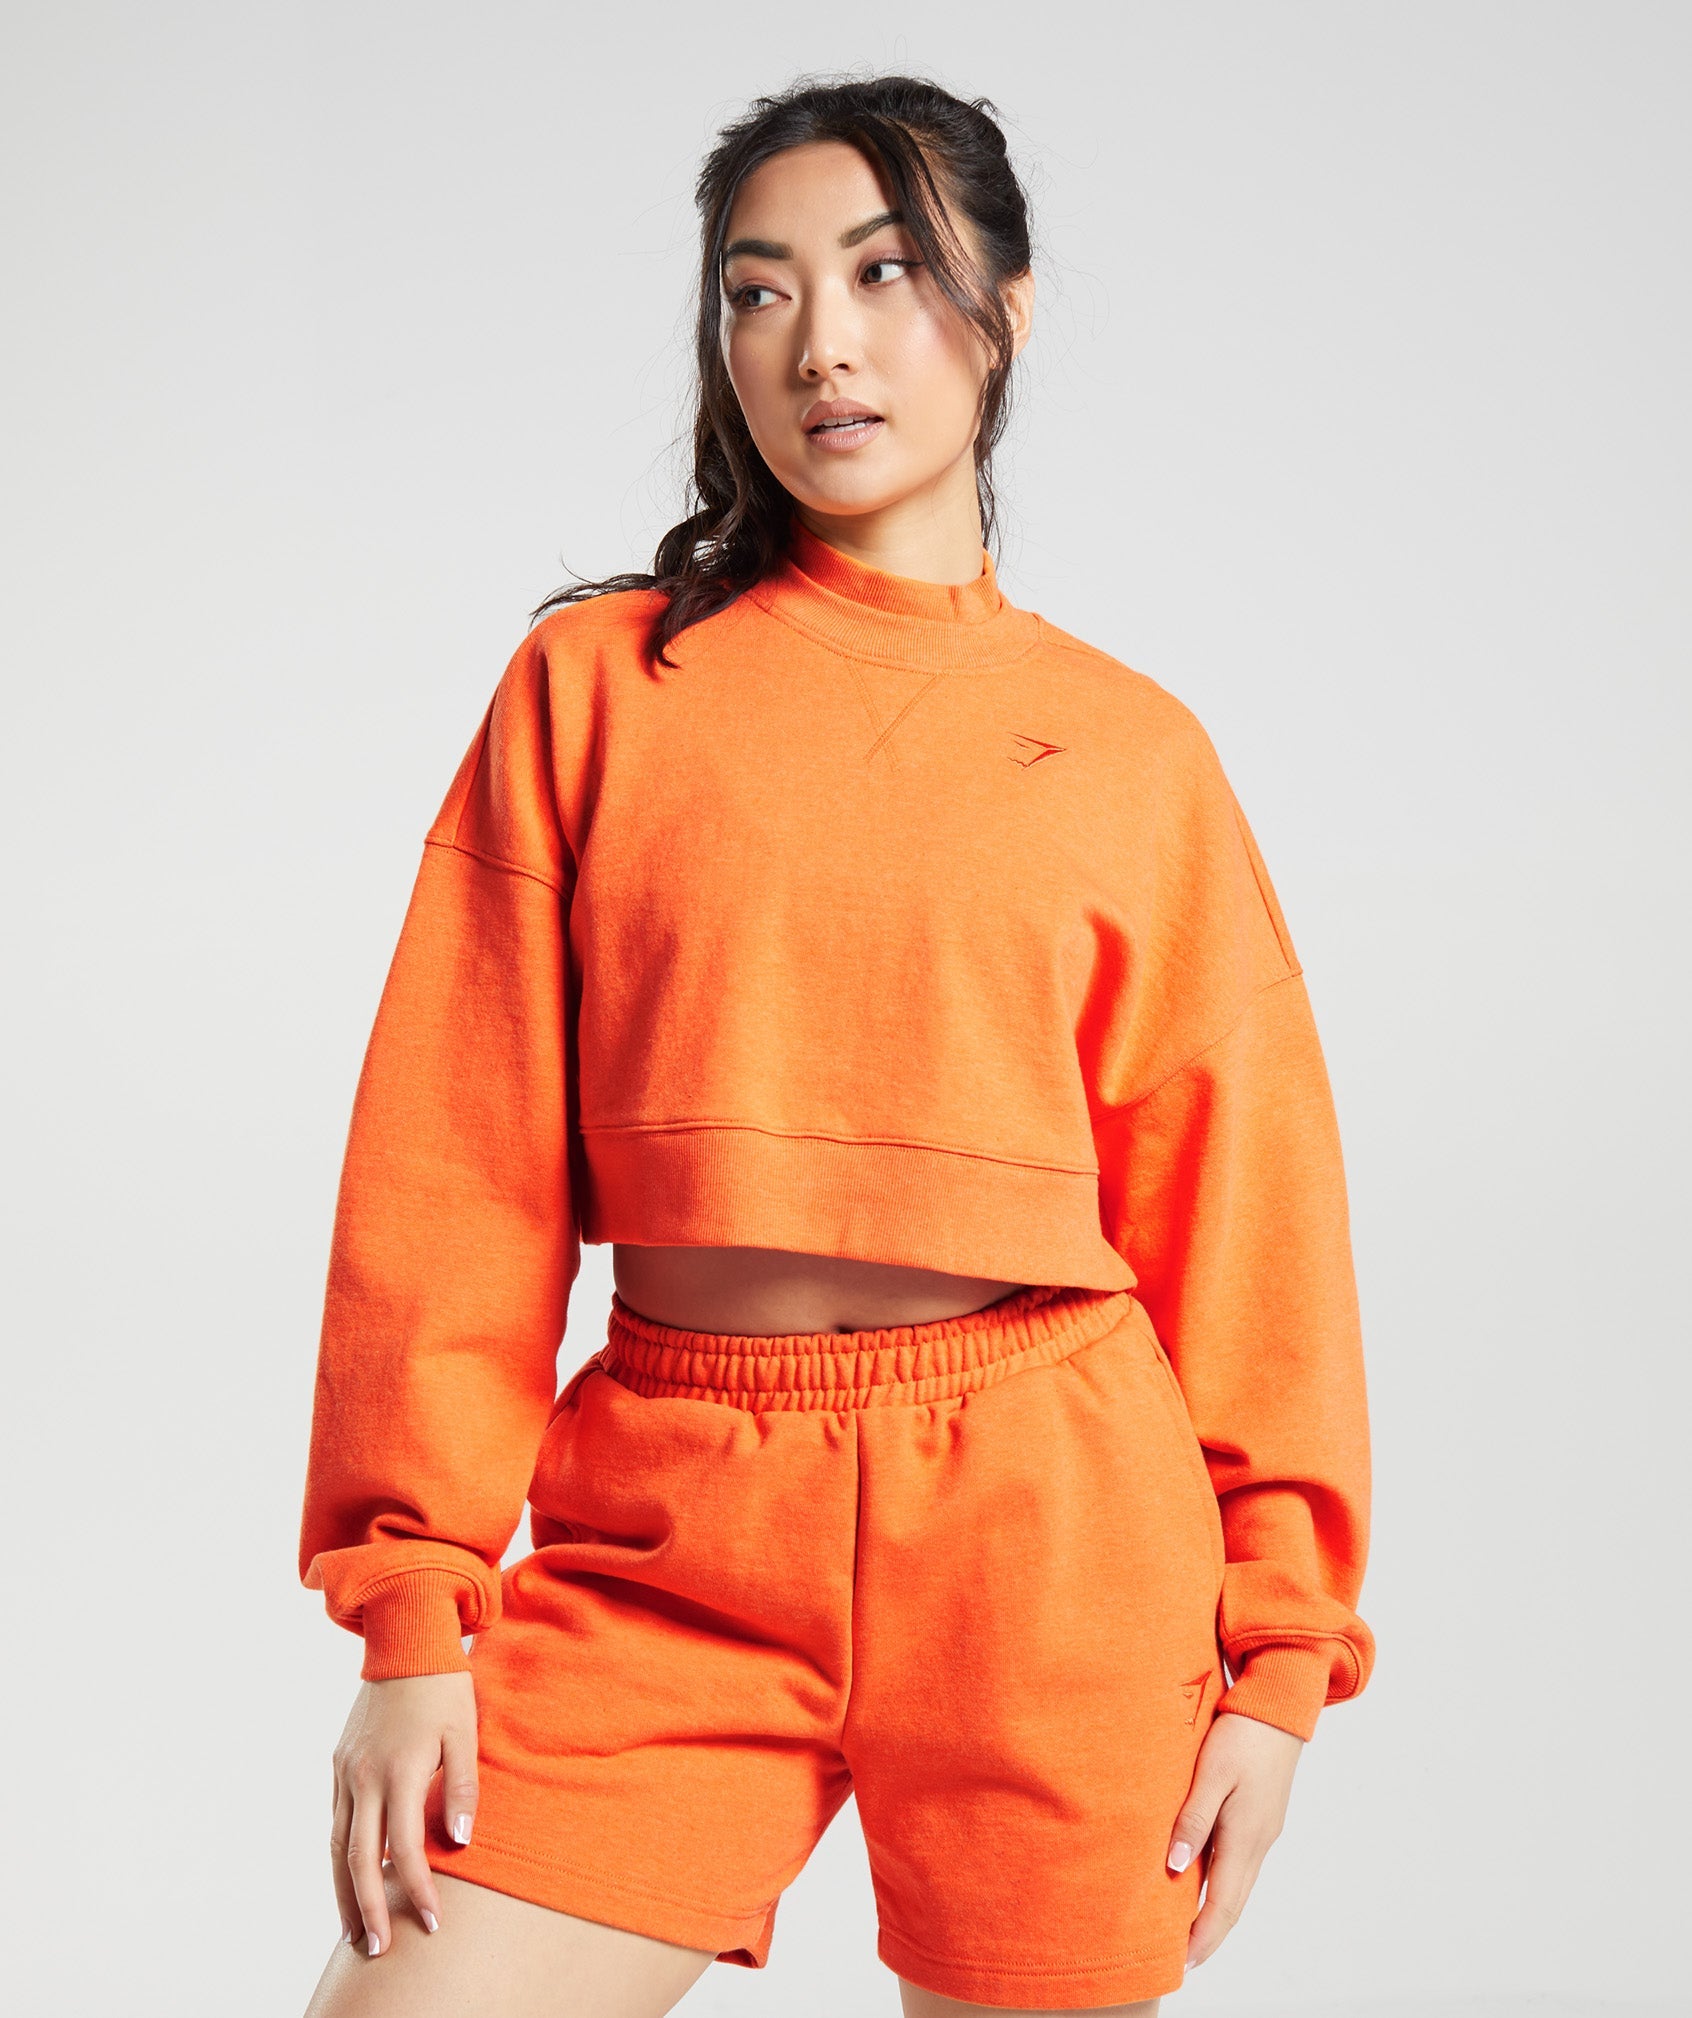 Rest Day Sweats Cropped Pullover in Blaze Orange Marl - view 1